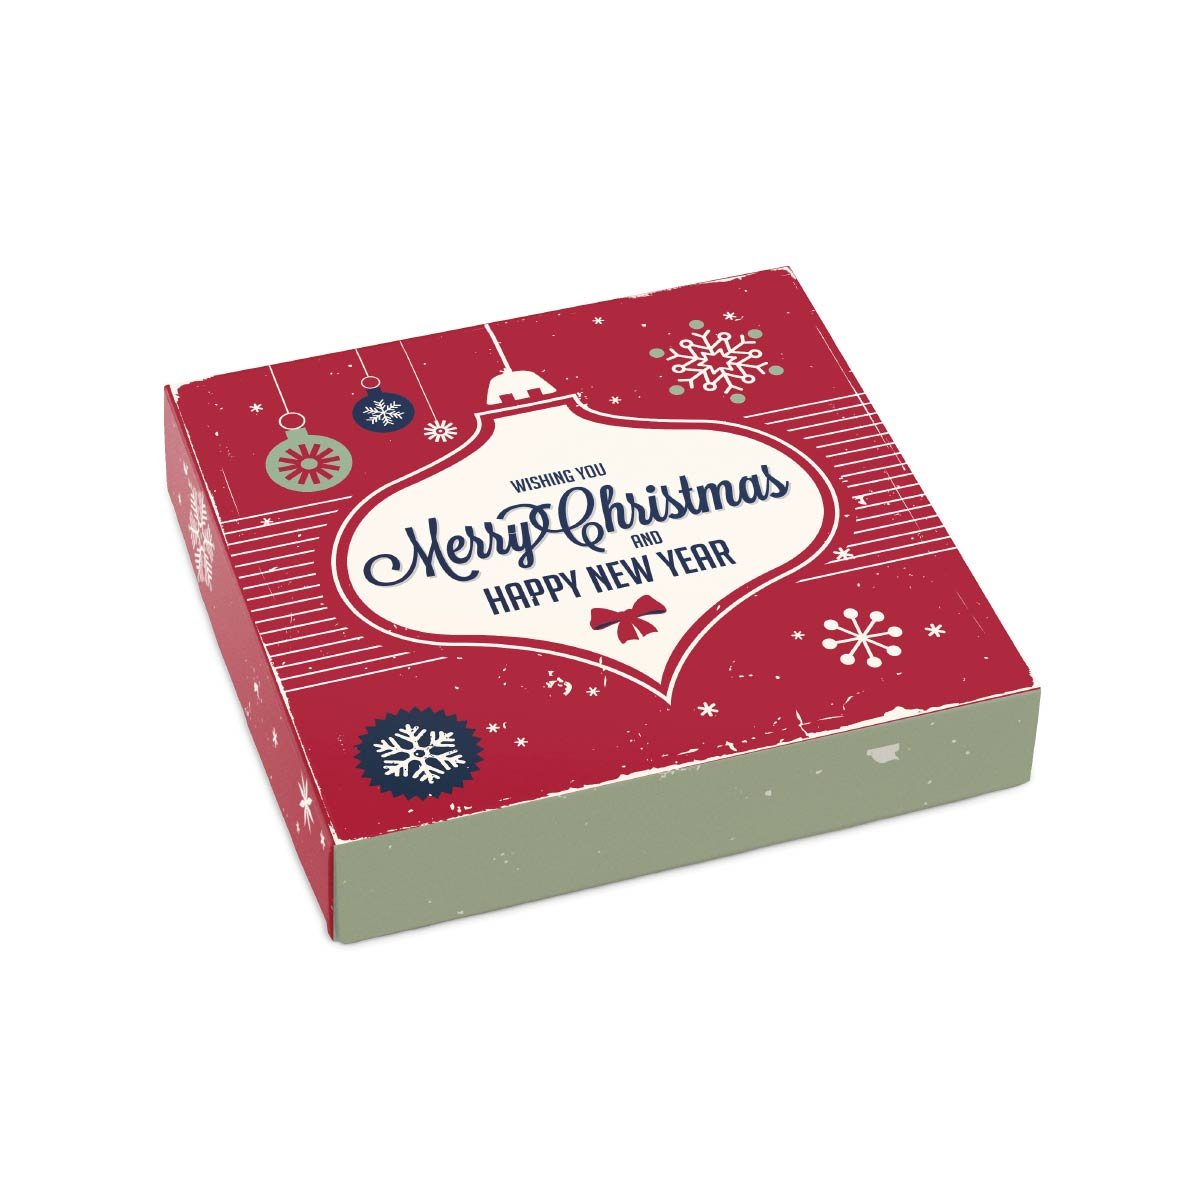 Merry Christmas and Happy New Year Gift Box with Assorted Sugar Free Chocolates